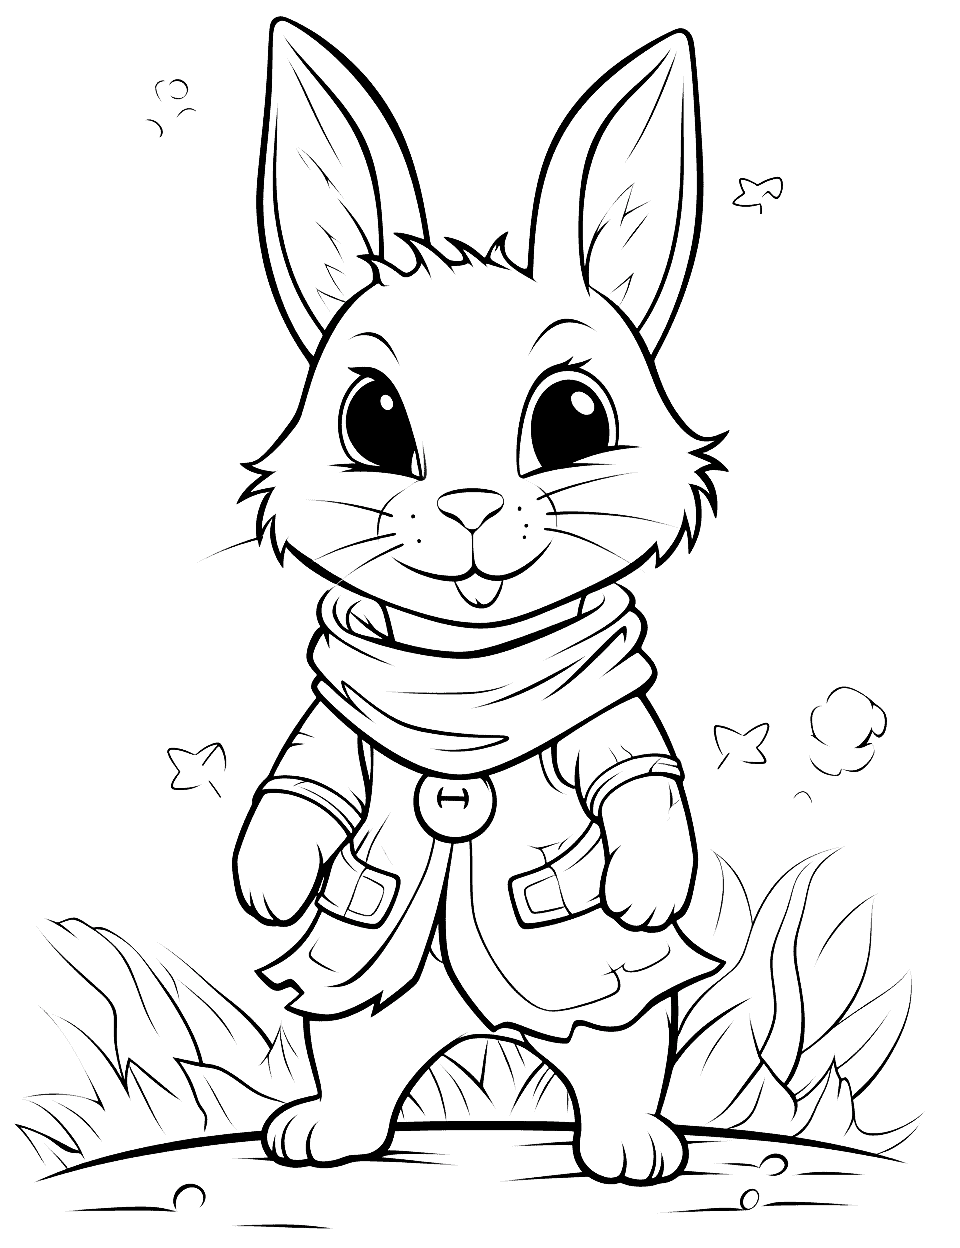 Warrior Bunny Coloring Page - A bunny proudly standing armored and ready for any challenge.